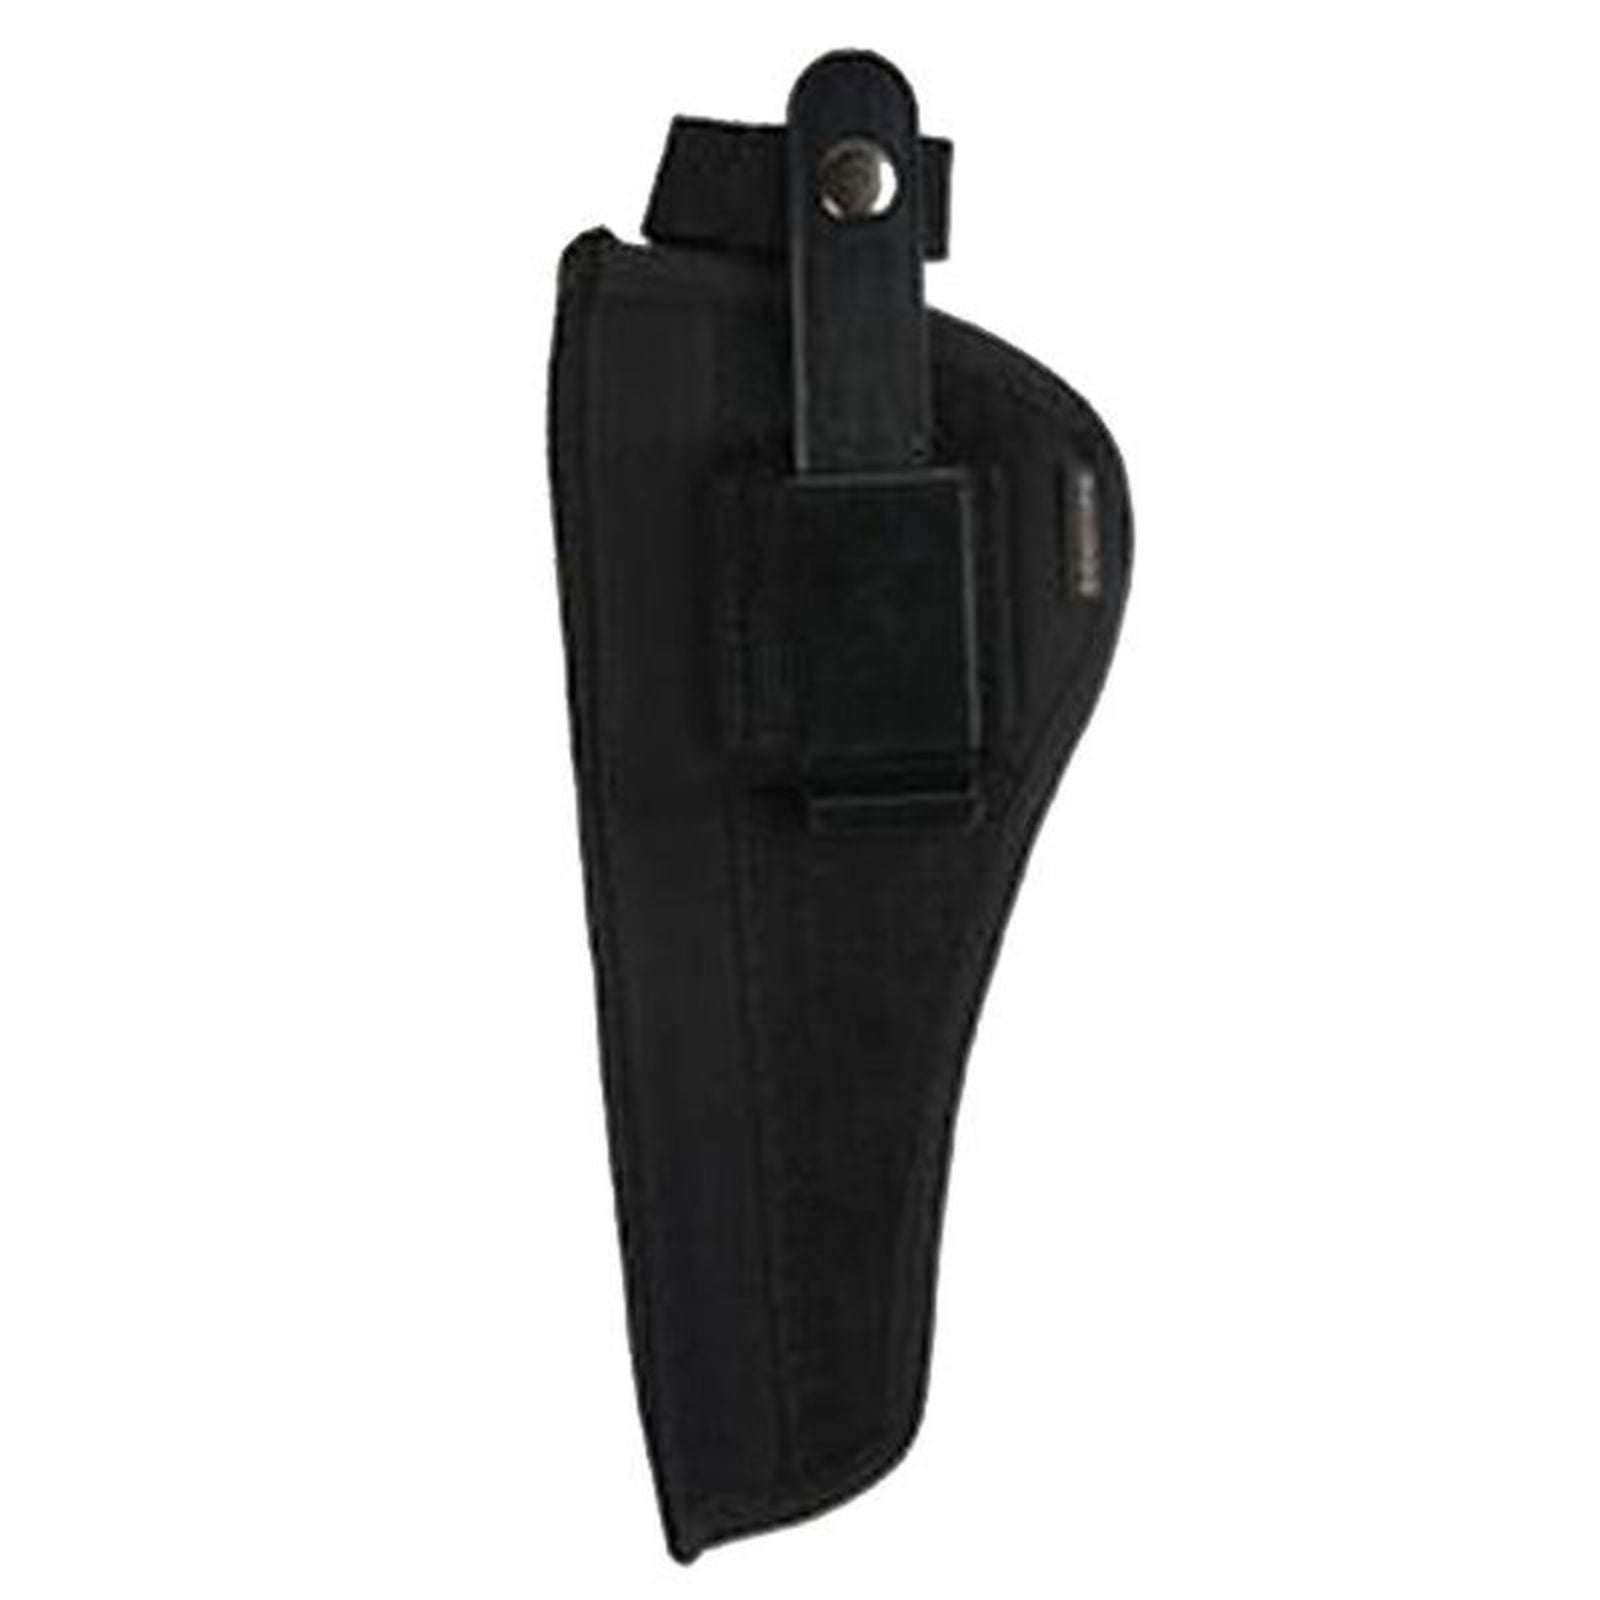 With 3" Barrel 6 SHOT Bulldog Gun holster For Smith & Wesson 66,547,586,629 